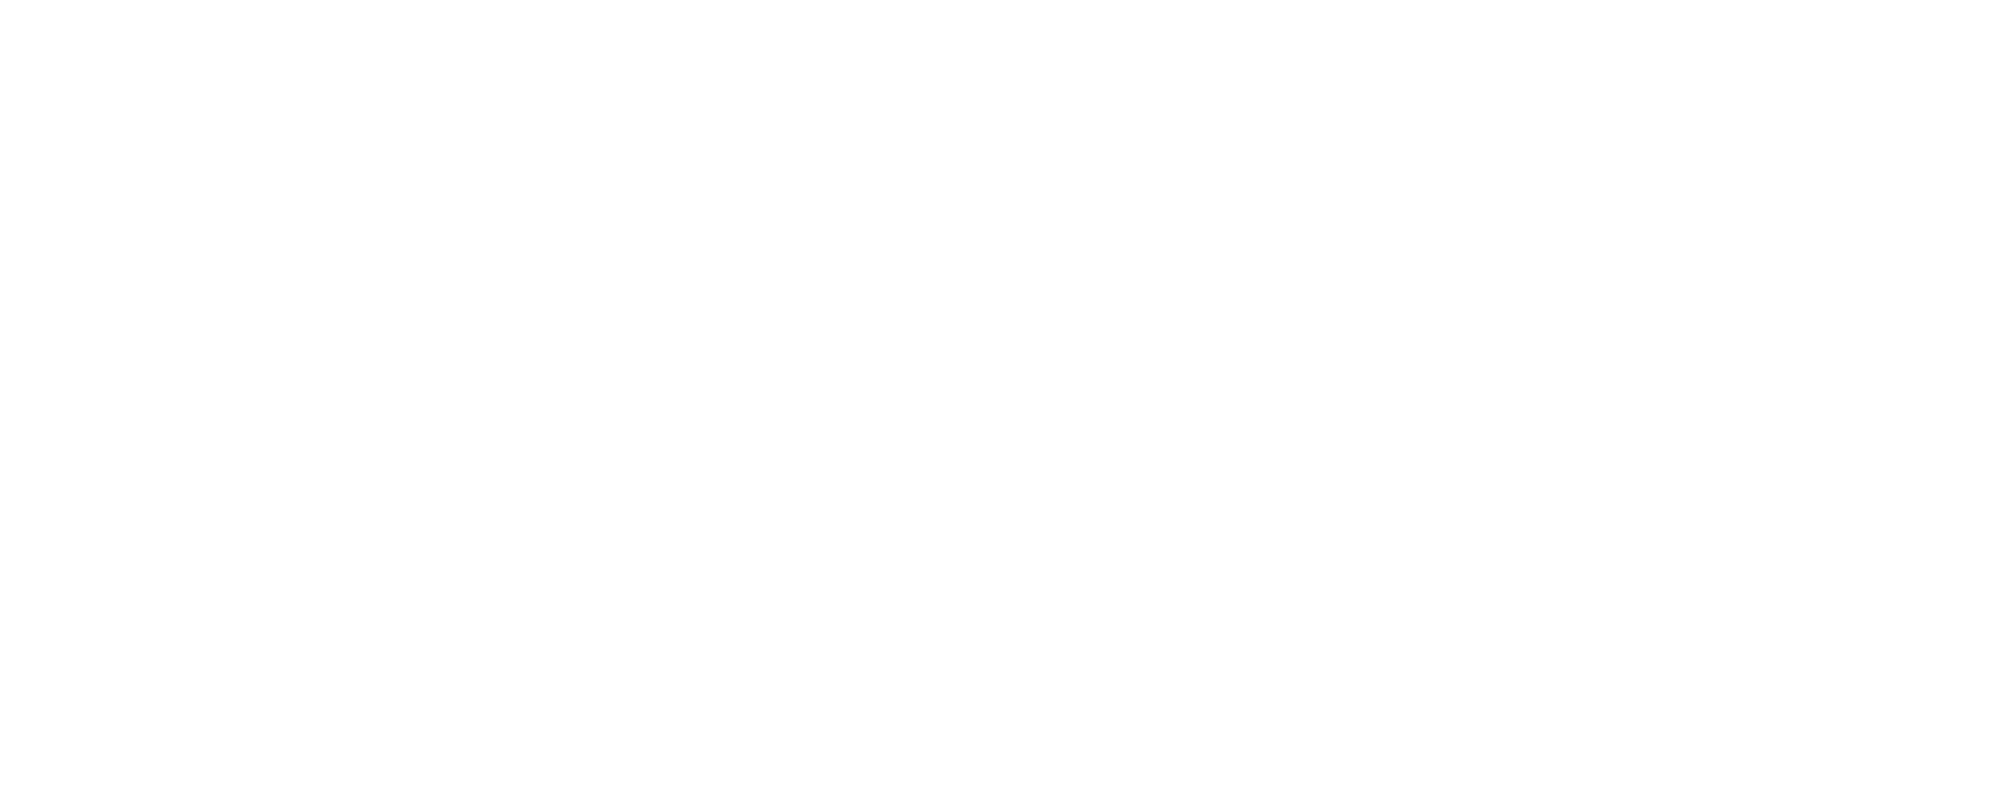 OVATION TV PARTNERS WITH CHARTER COMMUNICATIONS FOR 2019 STAND FOR THE ARTS AWARDS INITIATIVE